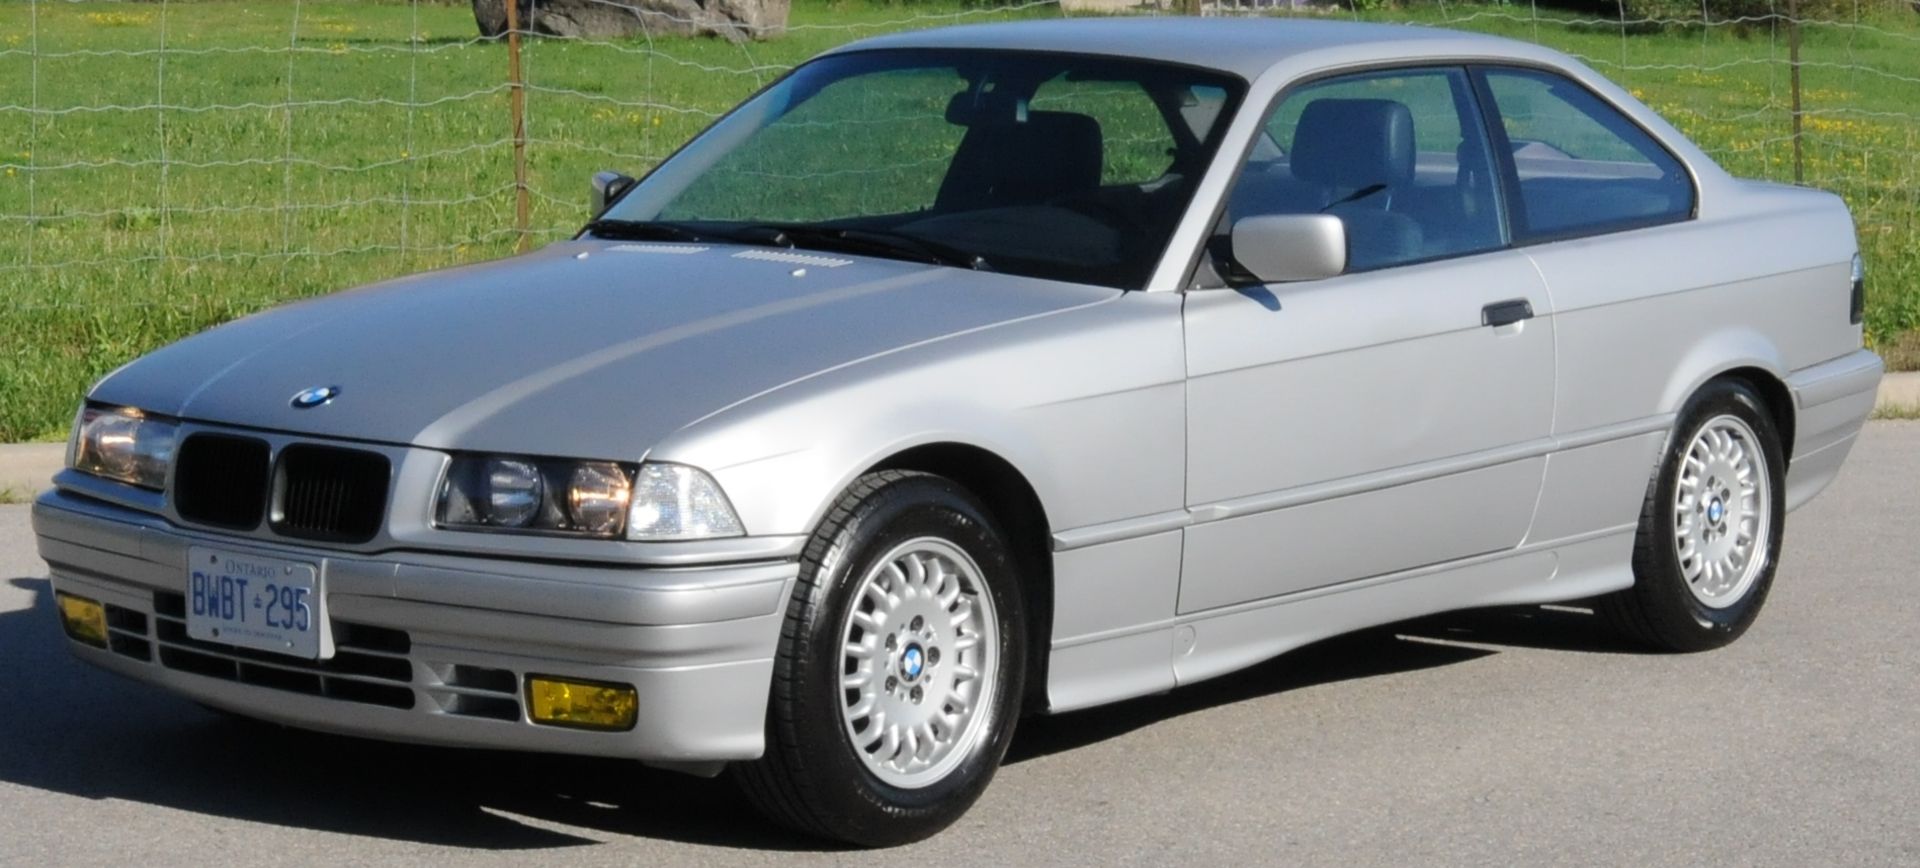 BMW (1993) E36 316IS COUPE WITH 1.8L VANOS VVT ENGINE, 5 SPEED MANUAL TRANSMISSION, REAR WHEEL